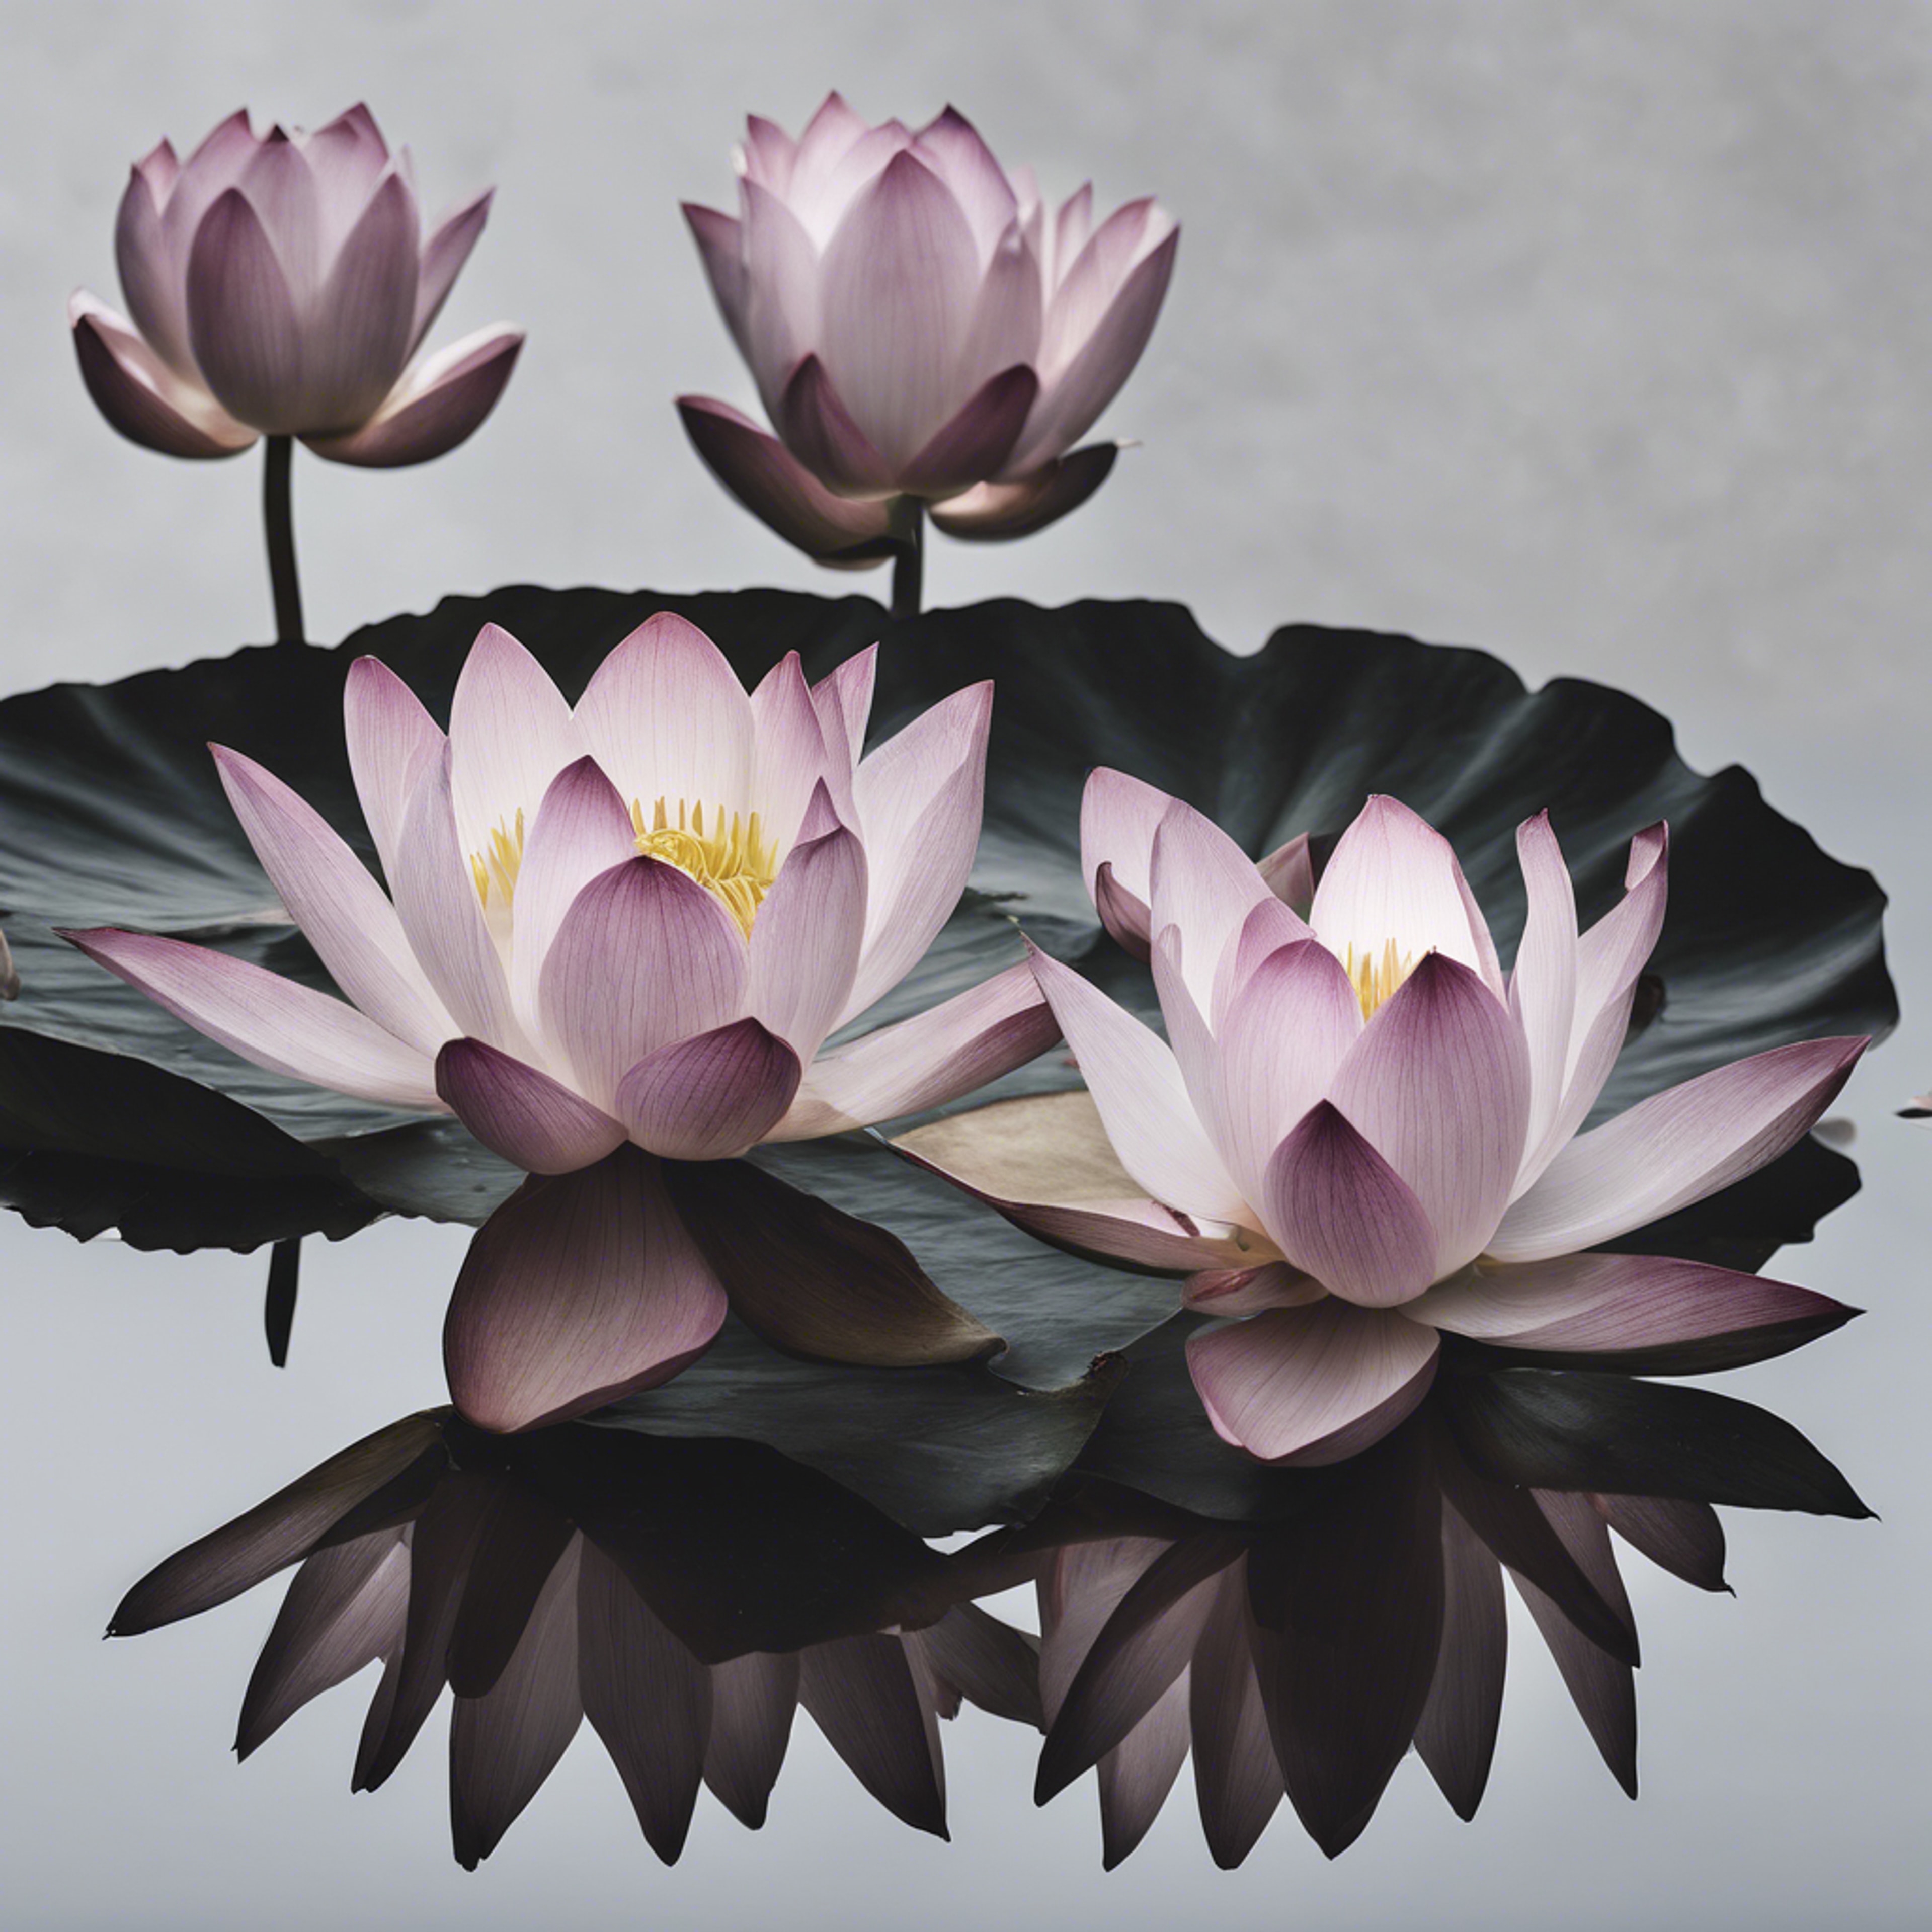 Dark lotuses floating elegantly on a textured white canvas. Behang[326d2c6a66b946e99dbc]